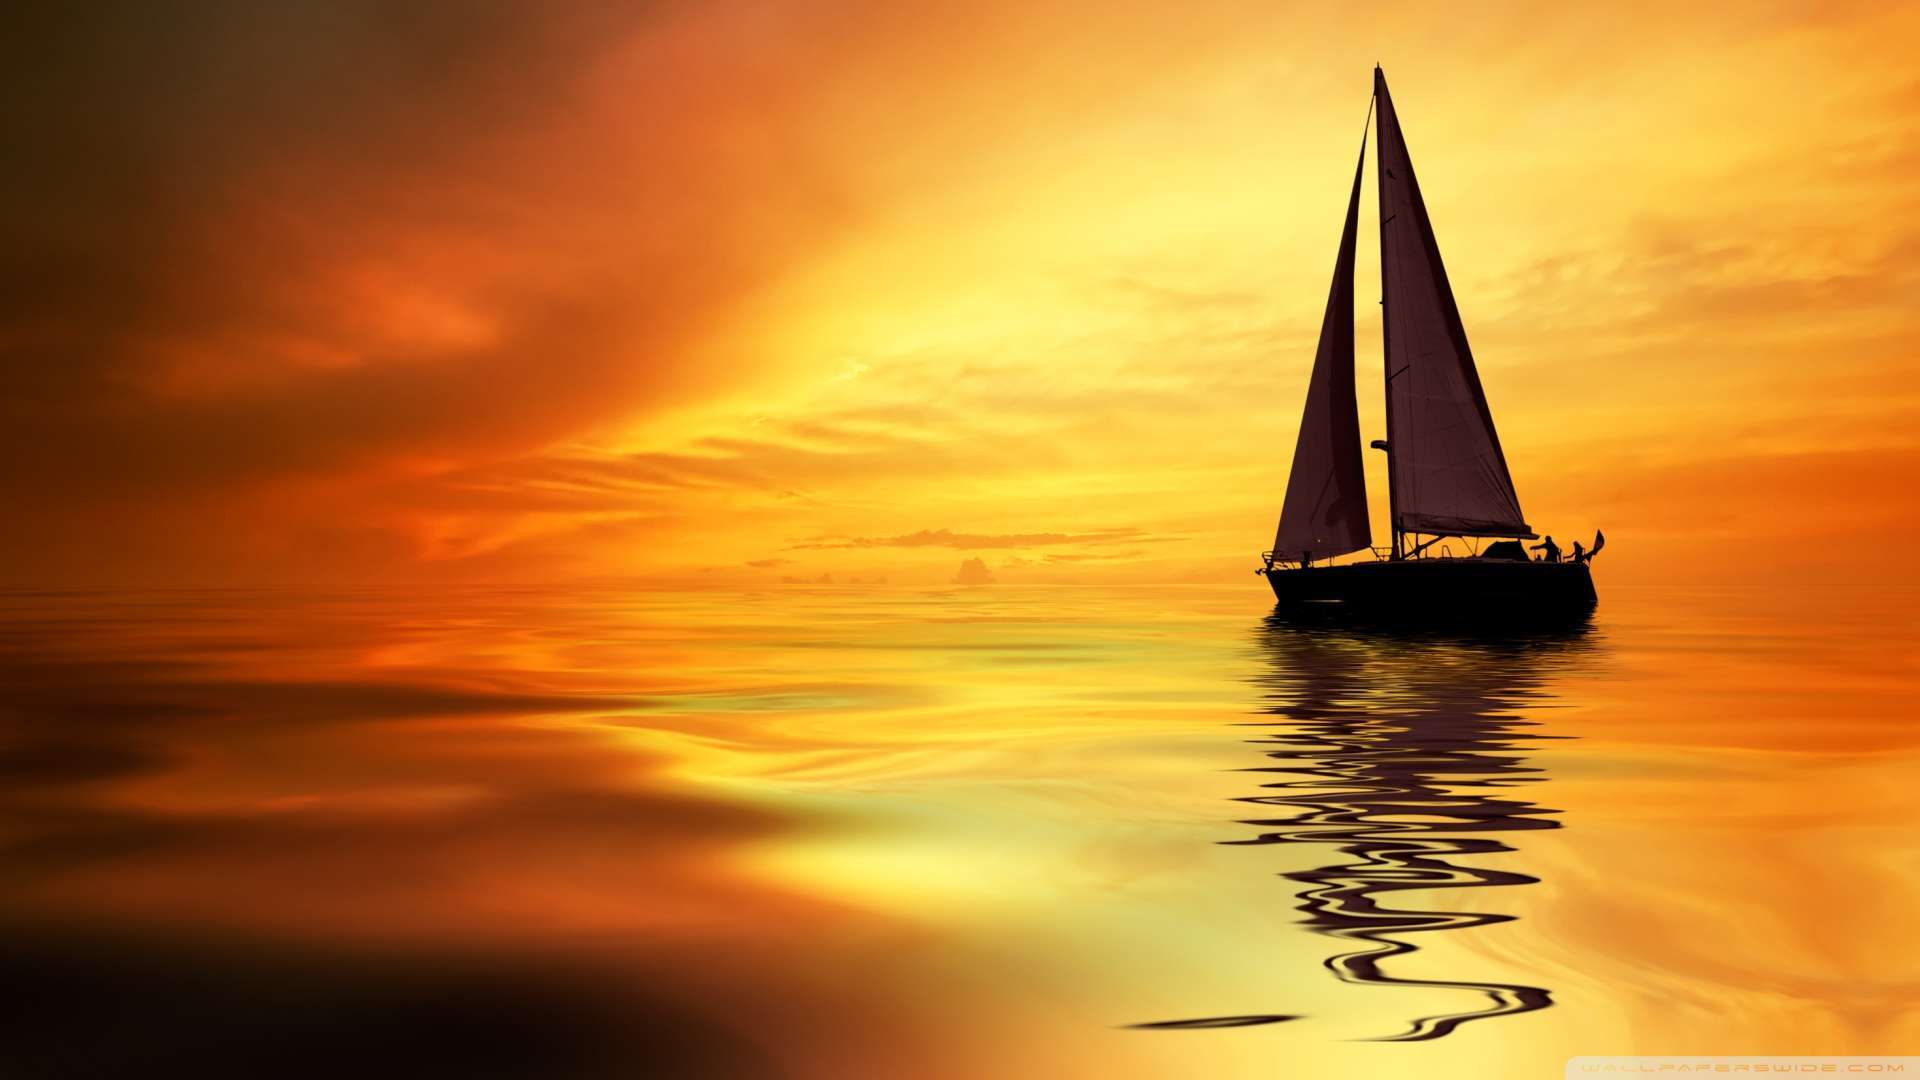 sail boat wallpaper 1080p hd is a fantastic hd wallpaper for your pc